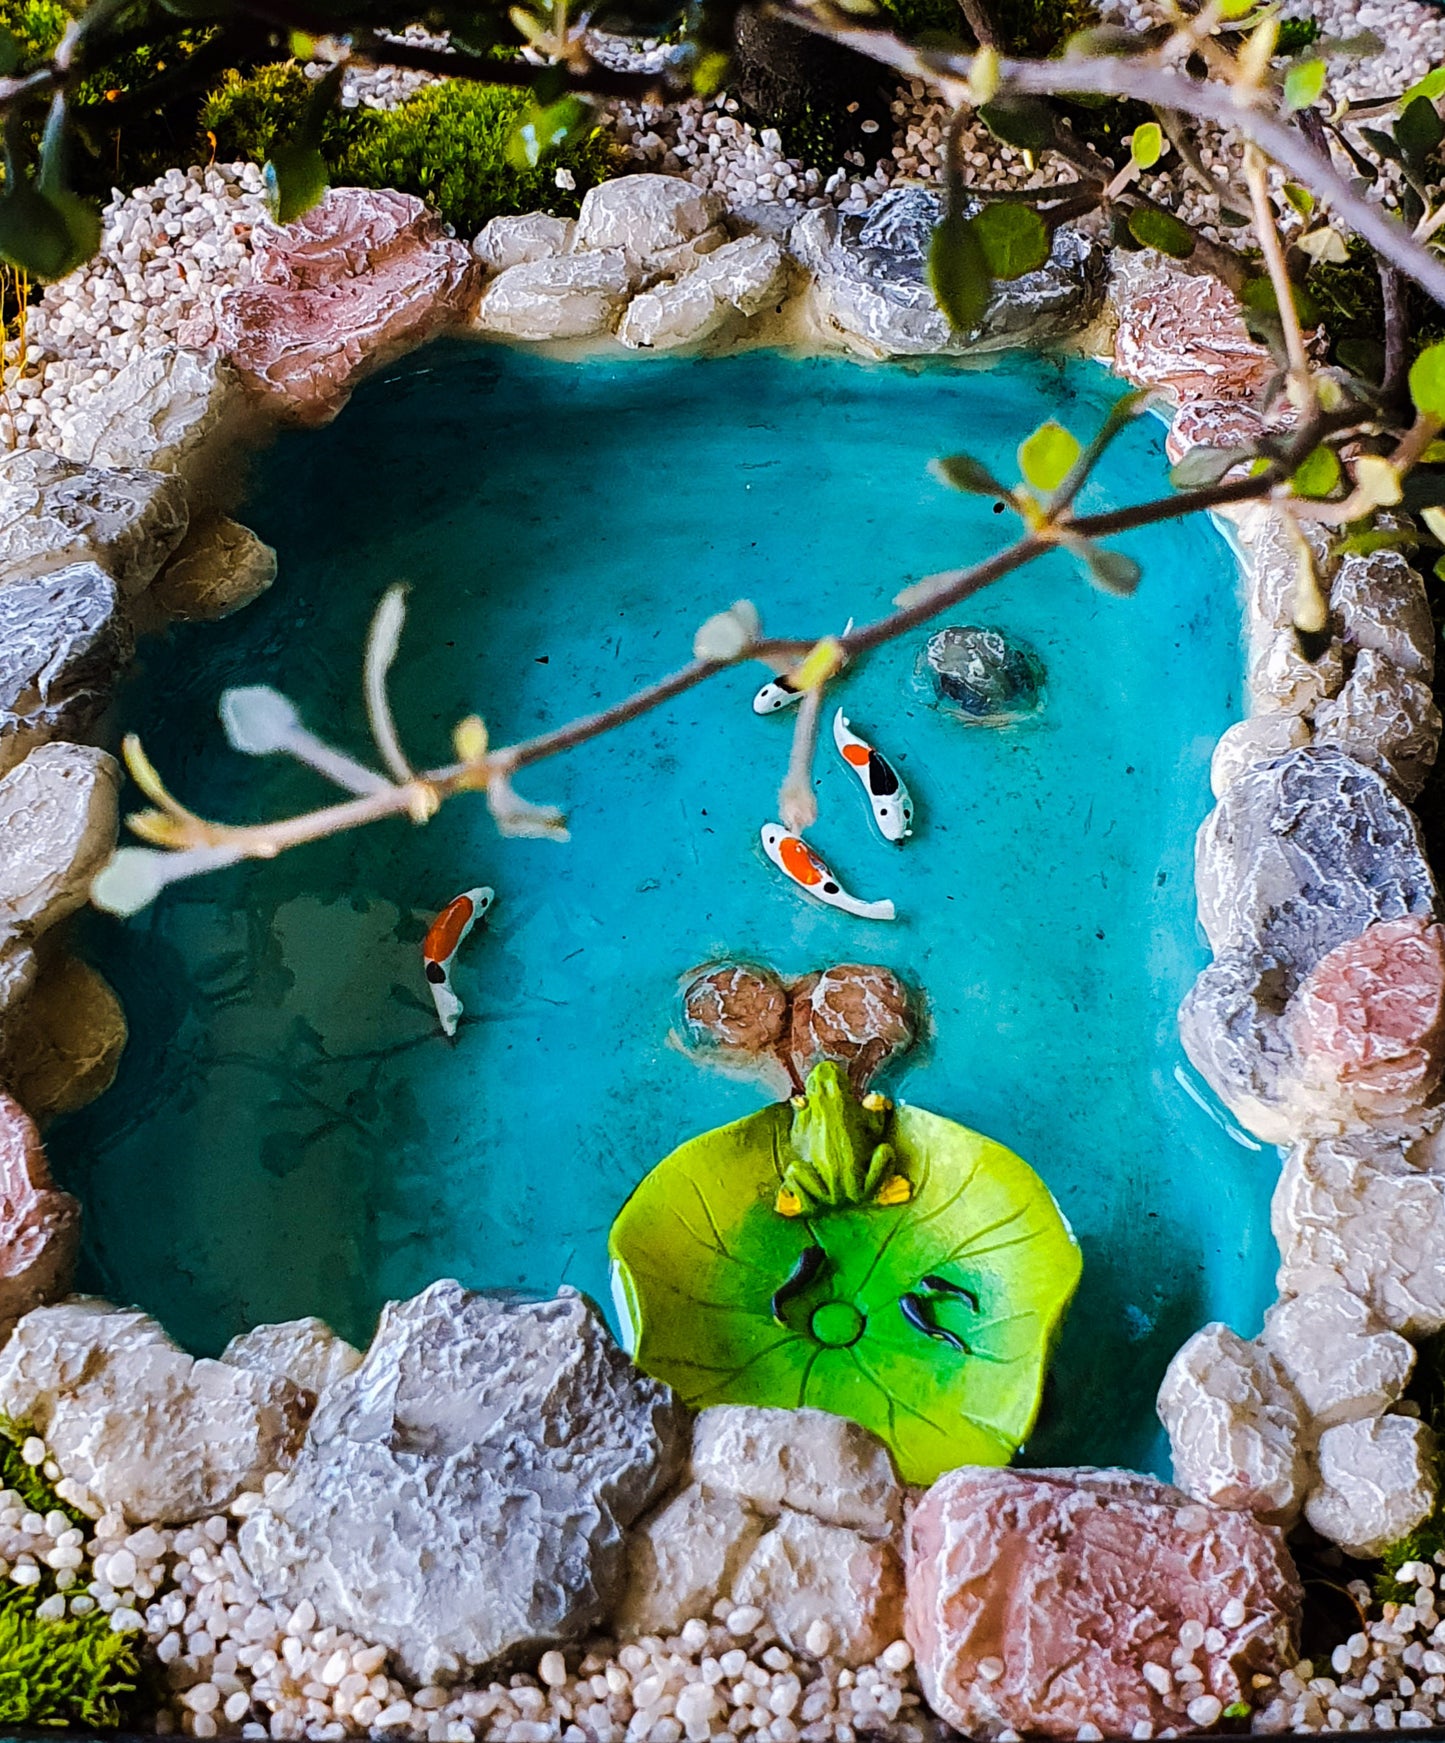 Koi Pond with floating lily